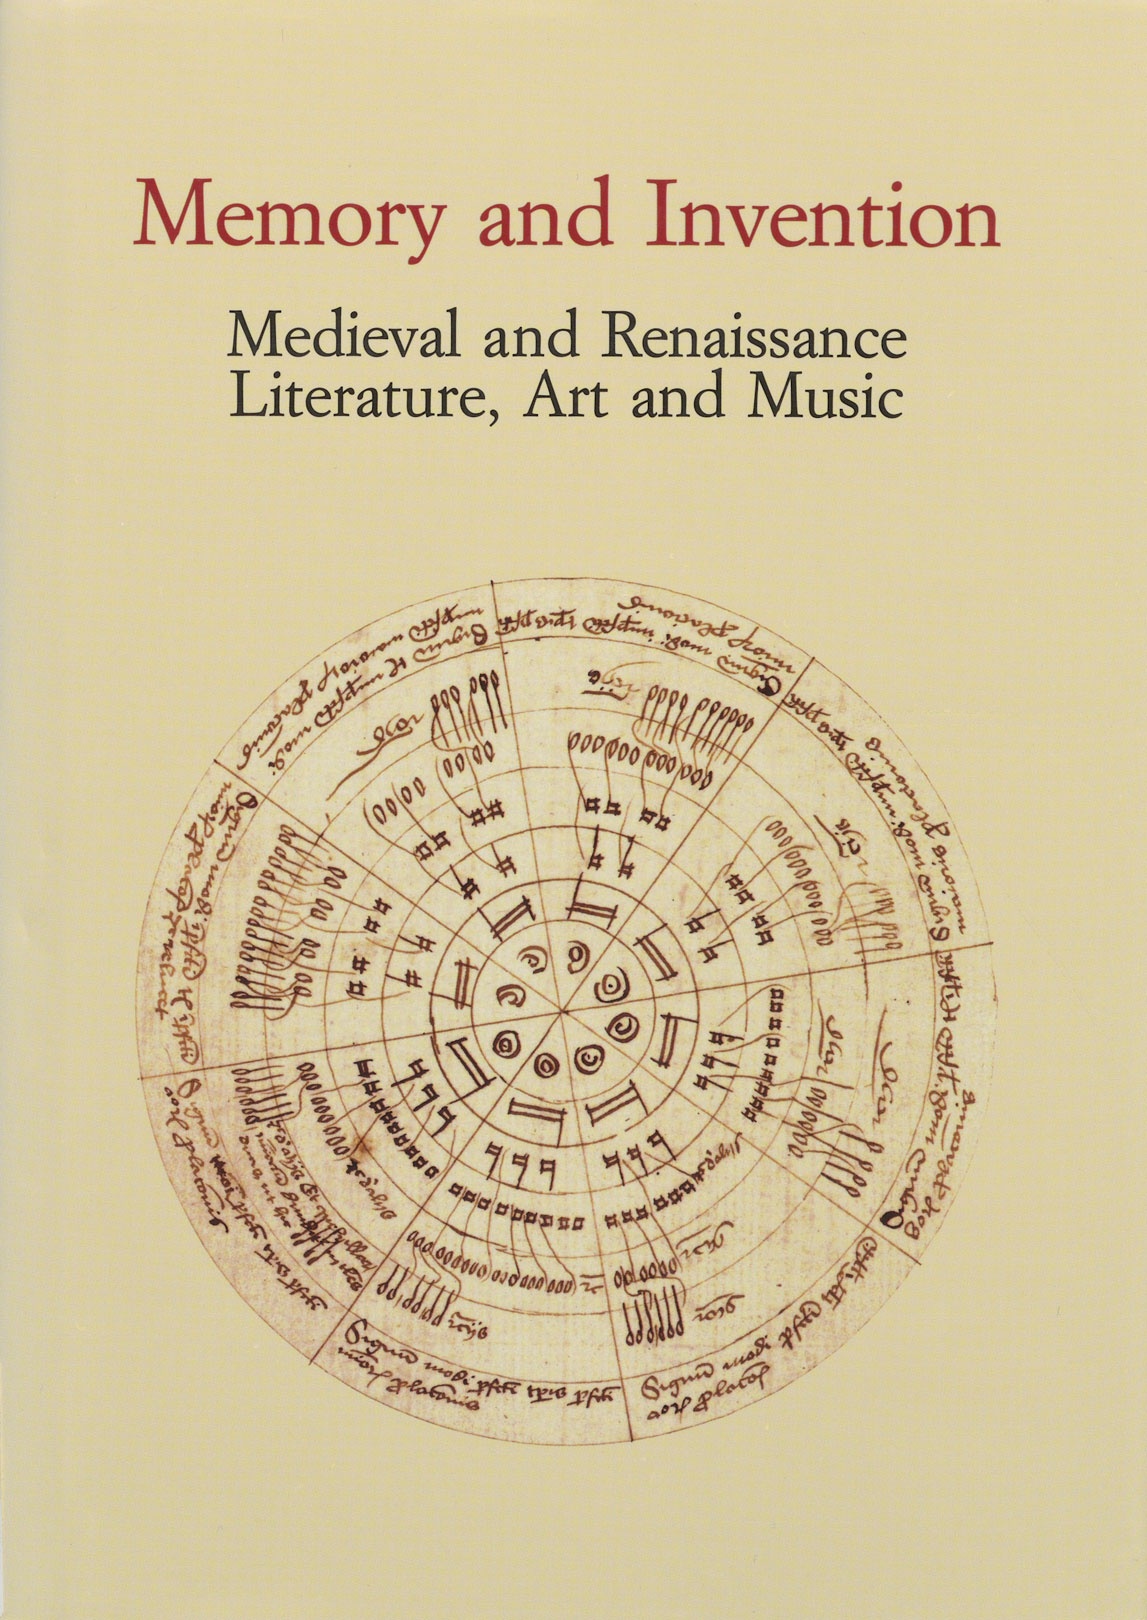 Memory and Invention: Medieval and Renaissance Literature, Art and Music